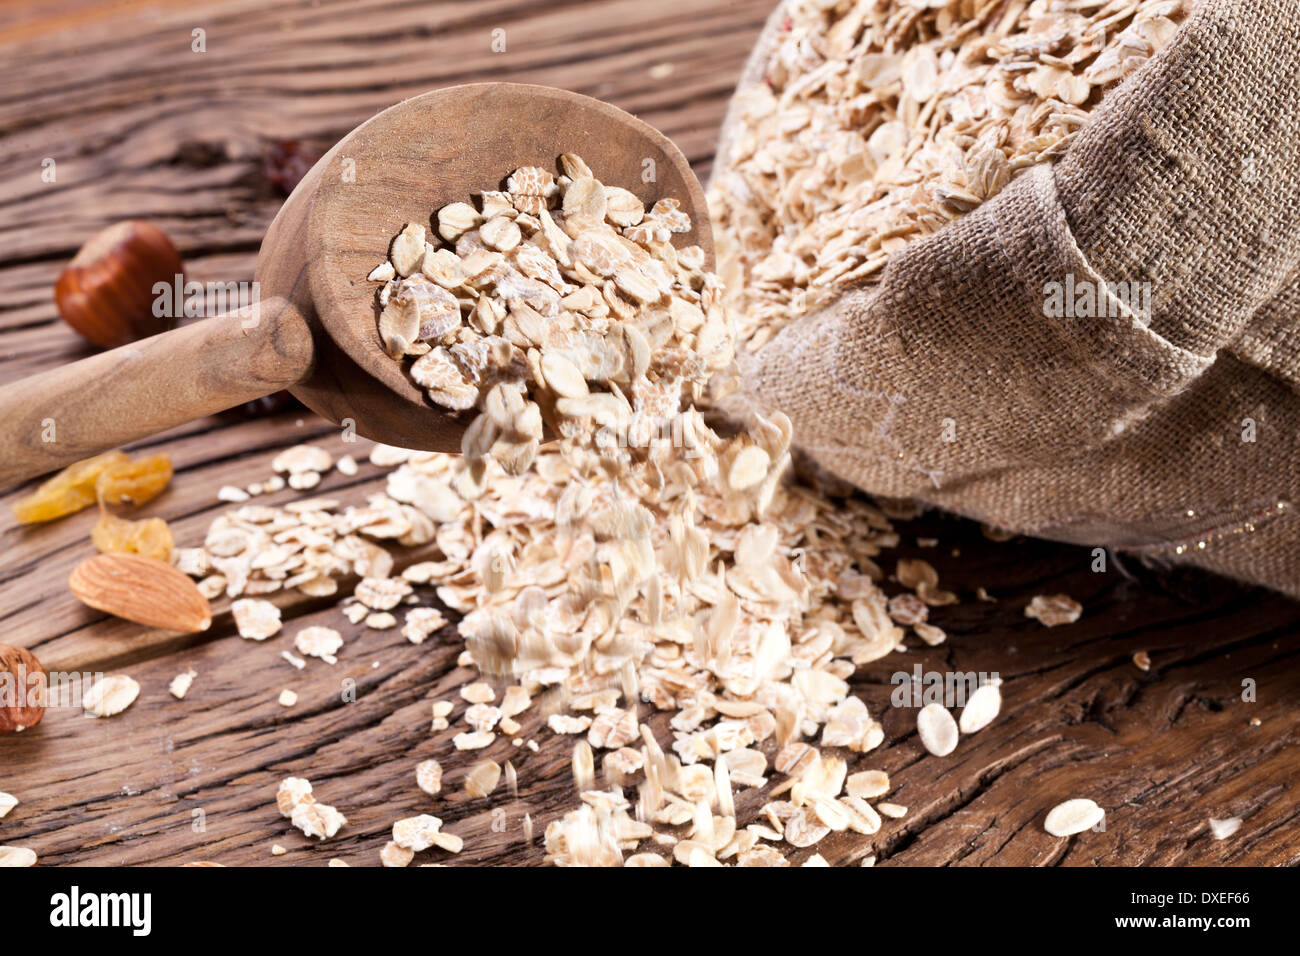 Rolled oats in the wooden spoon and sack on old wooden table. Stock Photo